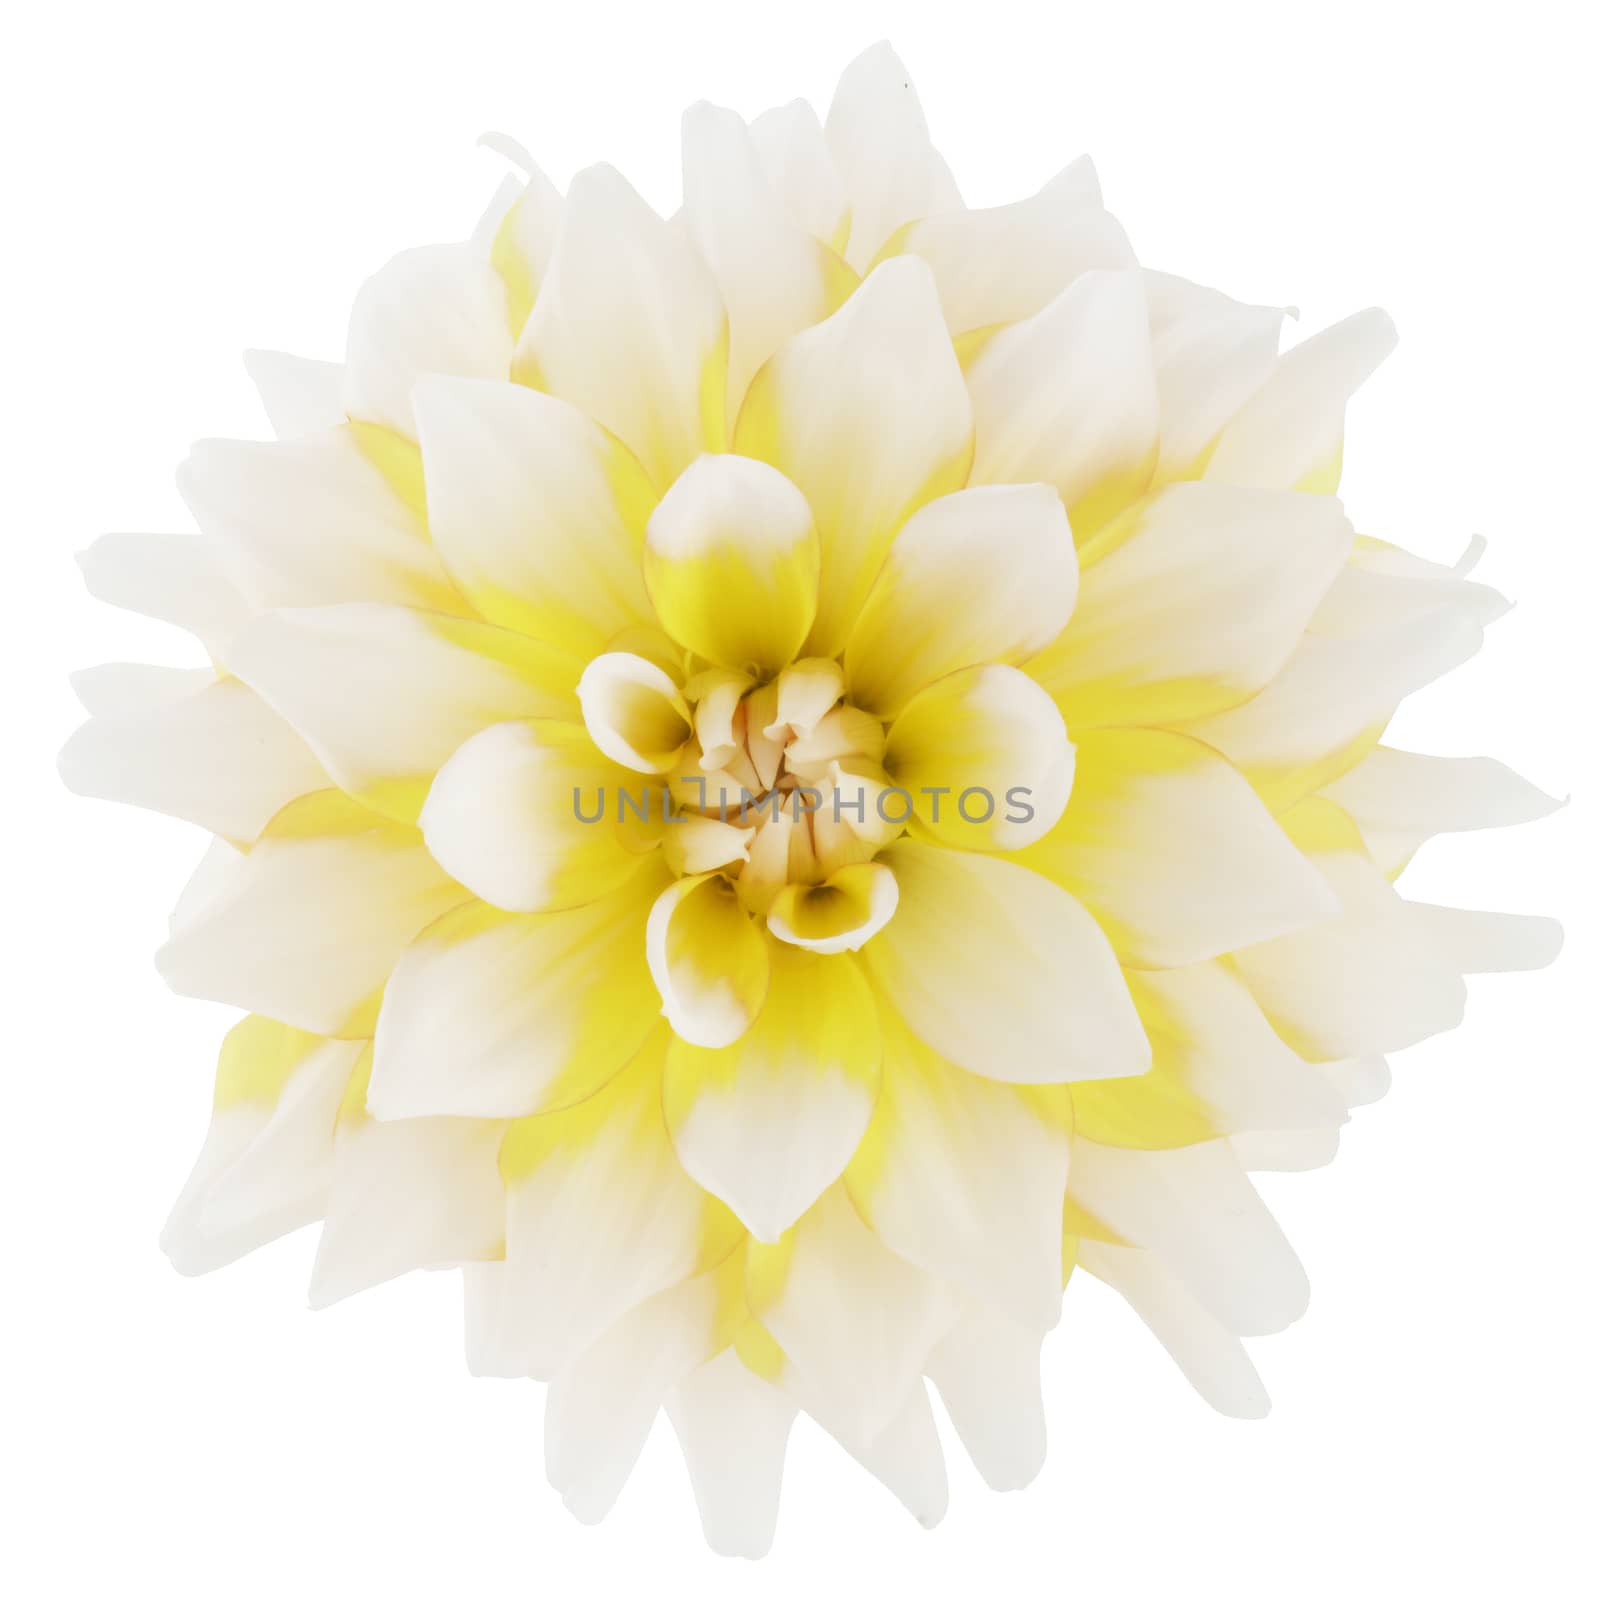 A white and yellow bi-color dahlia flower bloom isolated on white